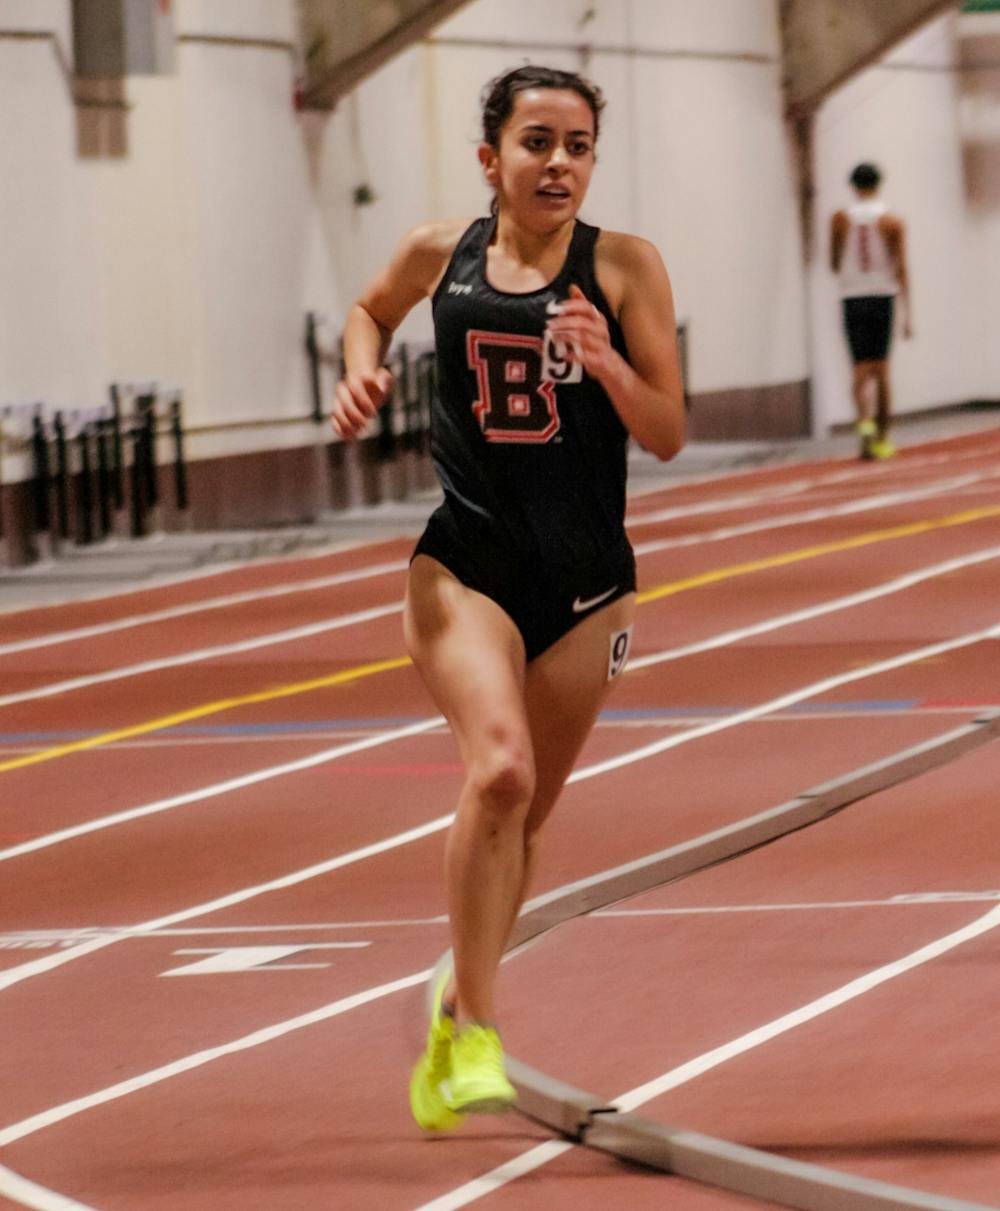 <p>Grace Dorantes &#x27;23 (above) took first place in the 3000-meter run, with a time of 10 minutes, 17.79 seconds that set a personal best.</p>